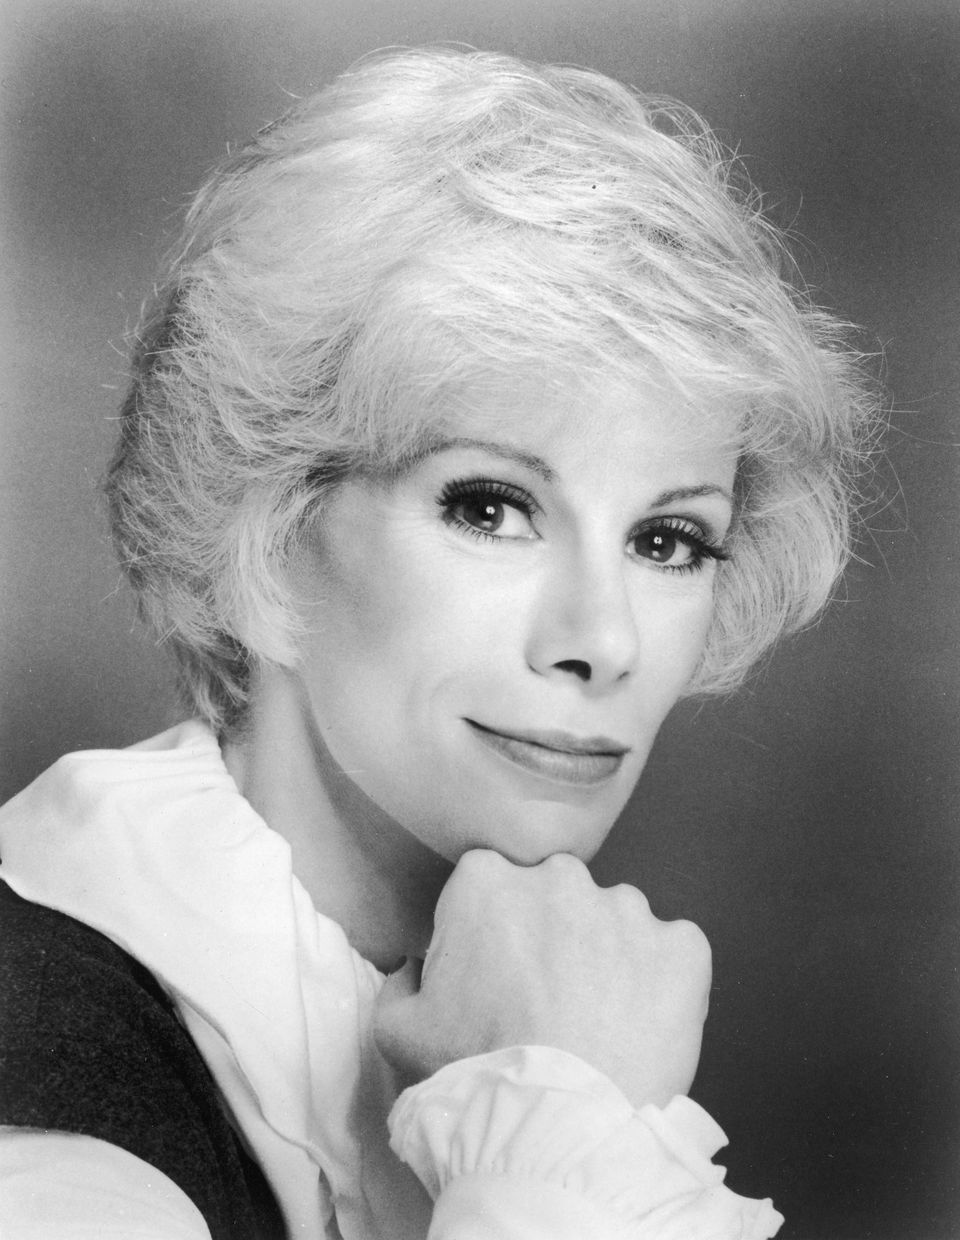 "<a href="http://www.theguardian.com/stage/2012/aug/09/comedy-gold-joan-rivers" role="link" class=" js-entry-link cet-external-link" data-vars-item-name="I hate thin people" data-vars-item-type="text" data-vars-unit-name="5bad40f8e4b04234e8587b1e" data-vars-unit-type="buzz_body" data-vars-target-content-id="http://www.theguardian.com/stage/2012/aug/09/comedy-gold-joan-rivers" data-vars-target-content-type="url" data-vars-type="web_external_link" data-vars-subunit-name="before_you_go_slideshow" data-vars-subunit-type="component" data-vars-position-in-subunit="0">I hate thin people</a>; 'Oh, does the tampon make me look fat?'"